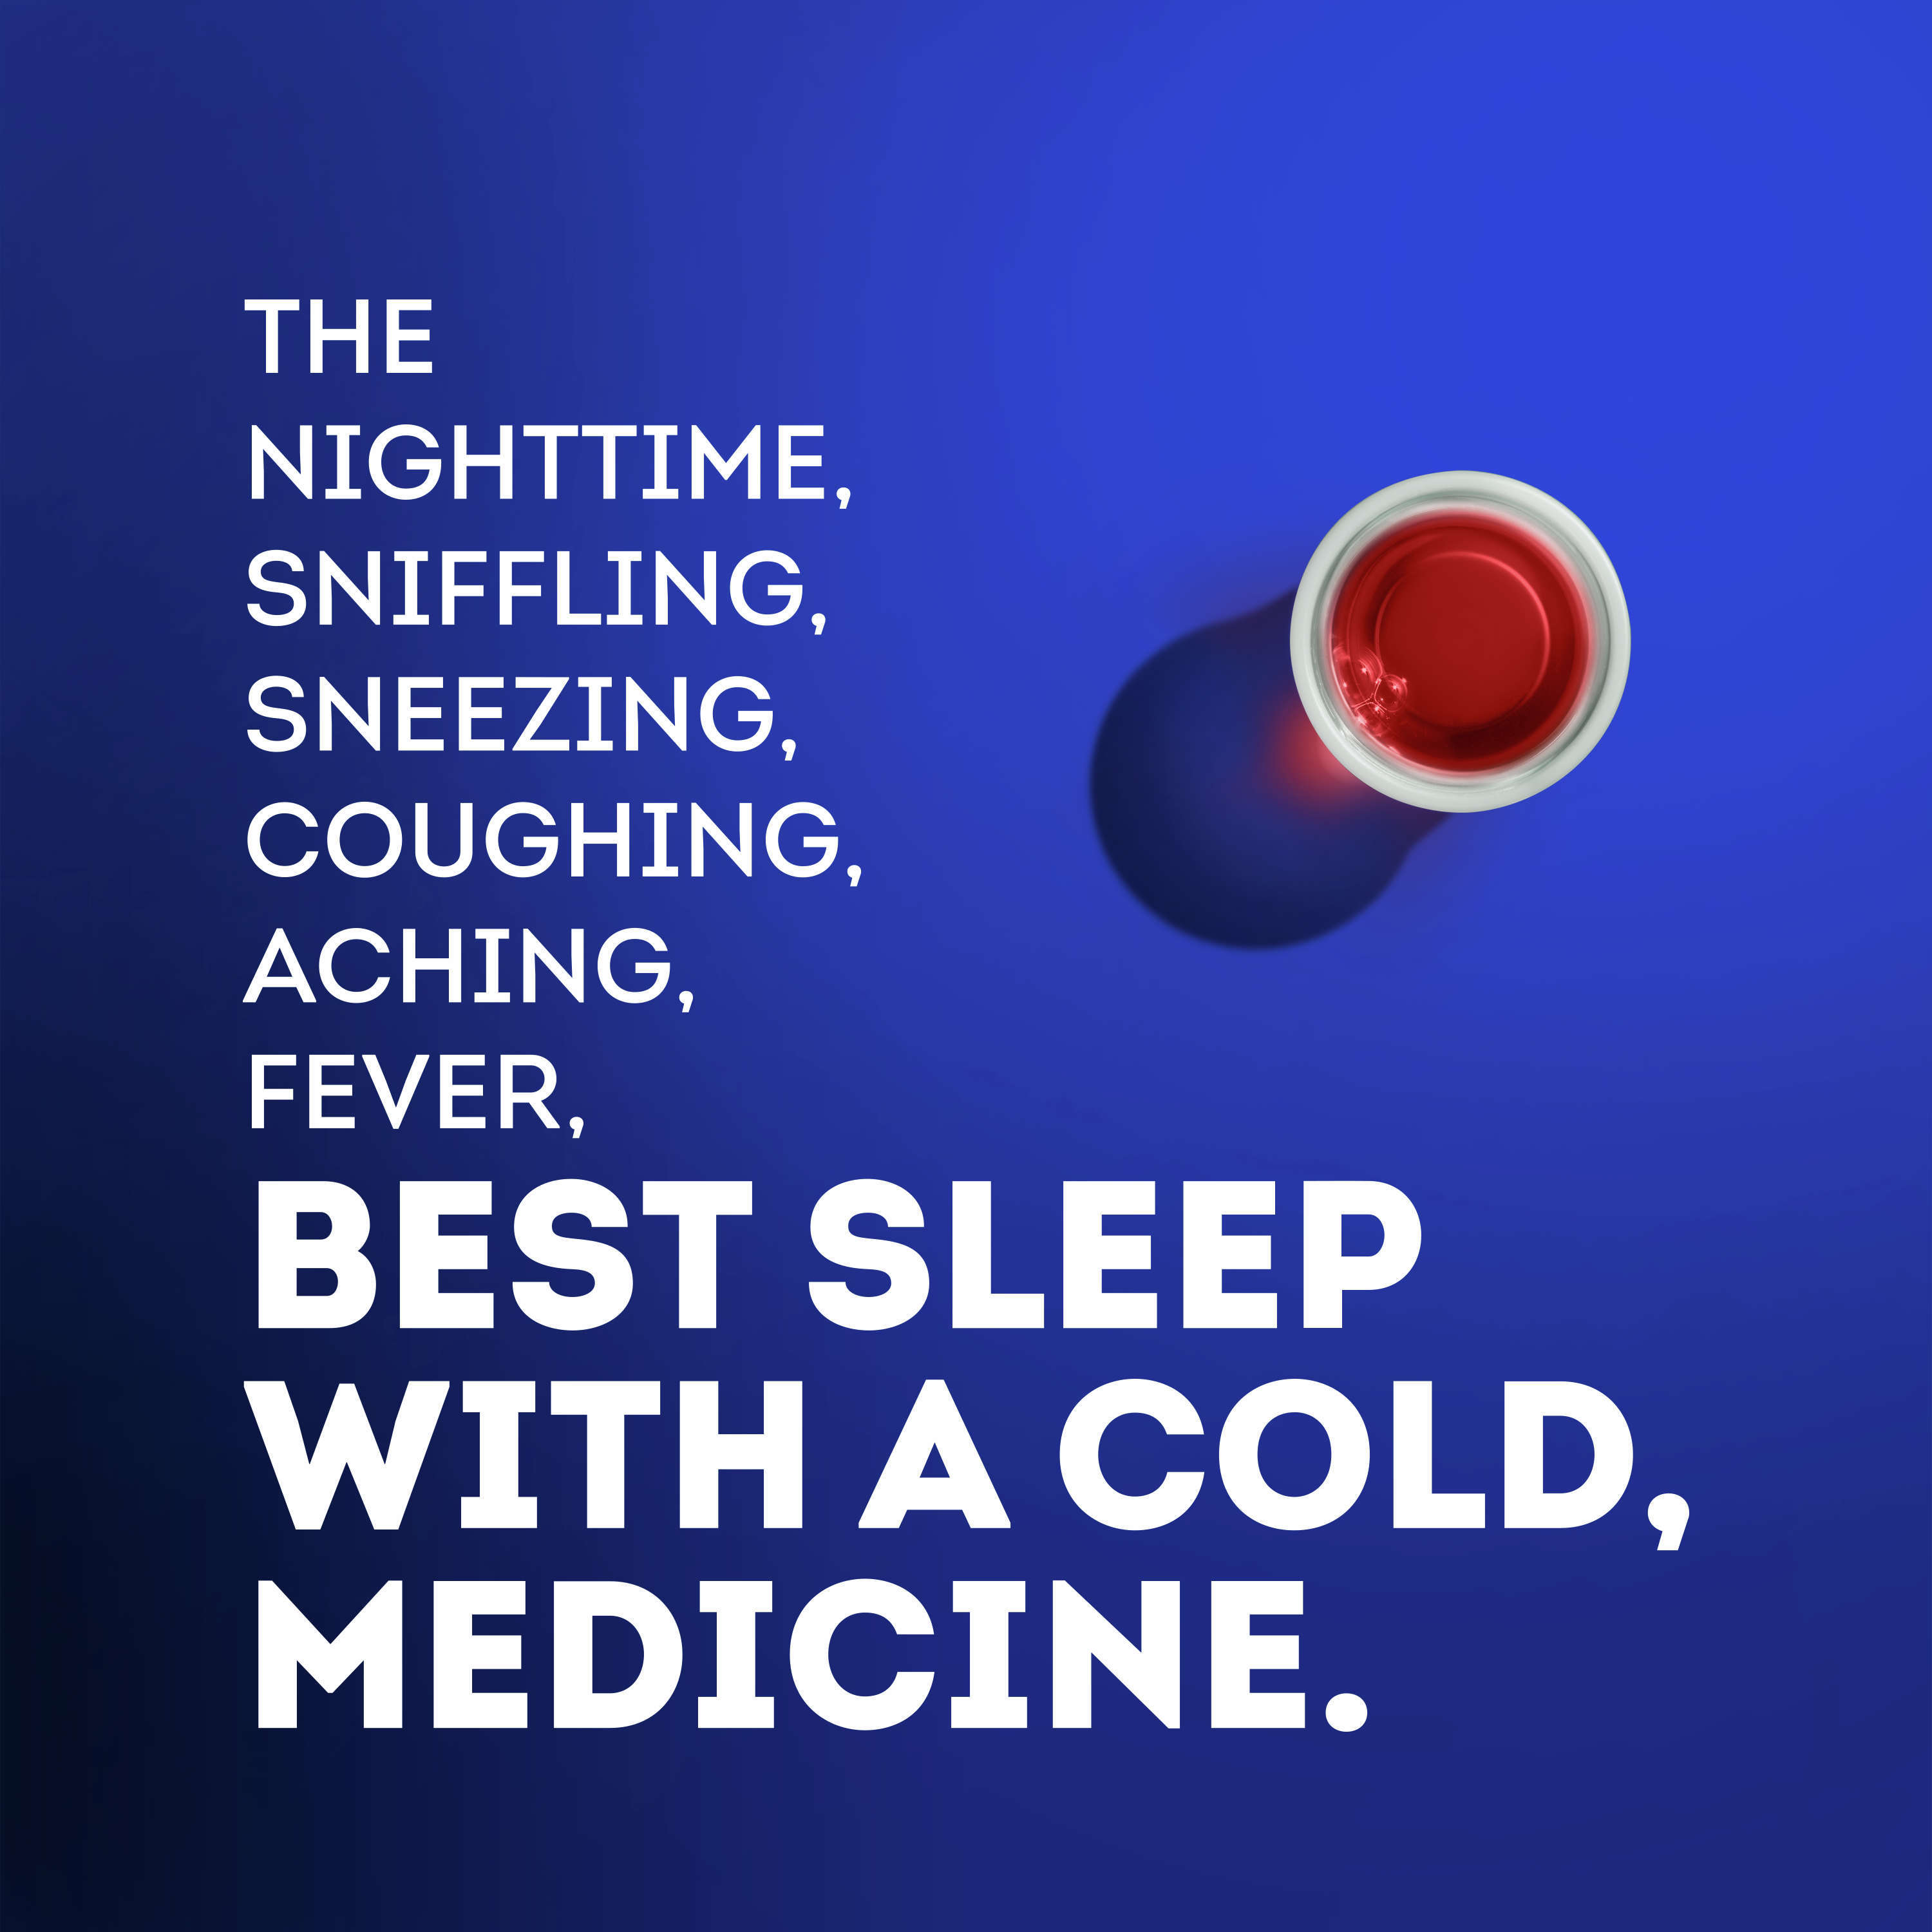 NyQuil Cough, Cold & Flu Nighttime Relief Liquid, Cherry Flavor - 354mL